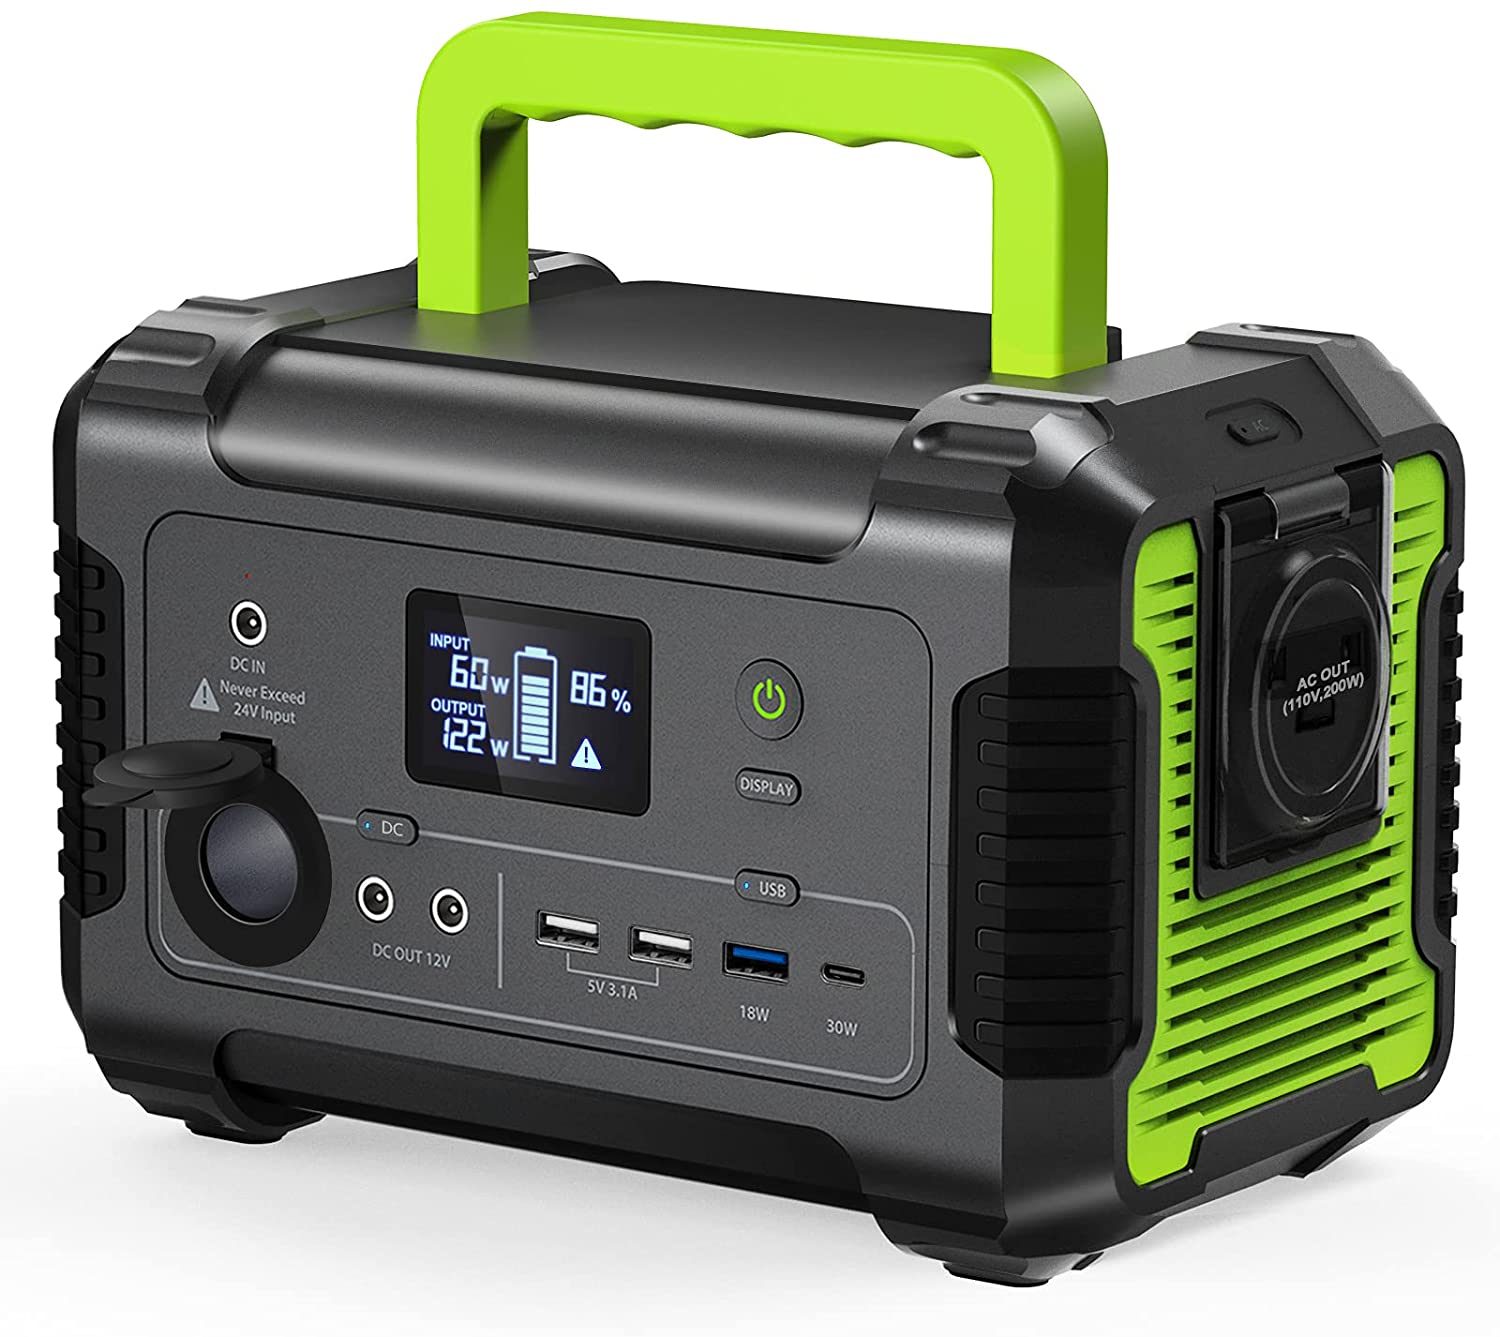 PAXCESS Portable Power Station 200W, 230Wh/62400mAh Emergency Backup Lithium Battery, 110V Pure Sine Wave AC Outlet, QC 3.0, USB-C PD Input/Output, Solar Generator $134.99 + FS